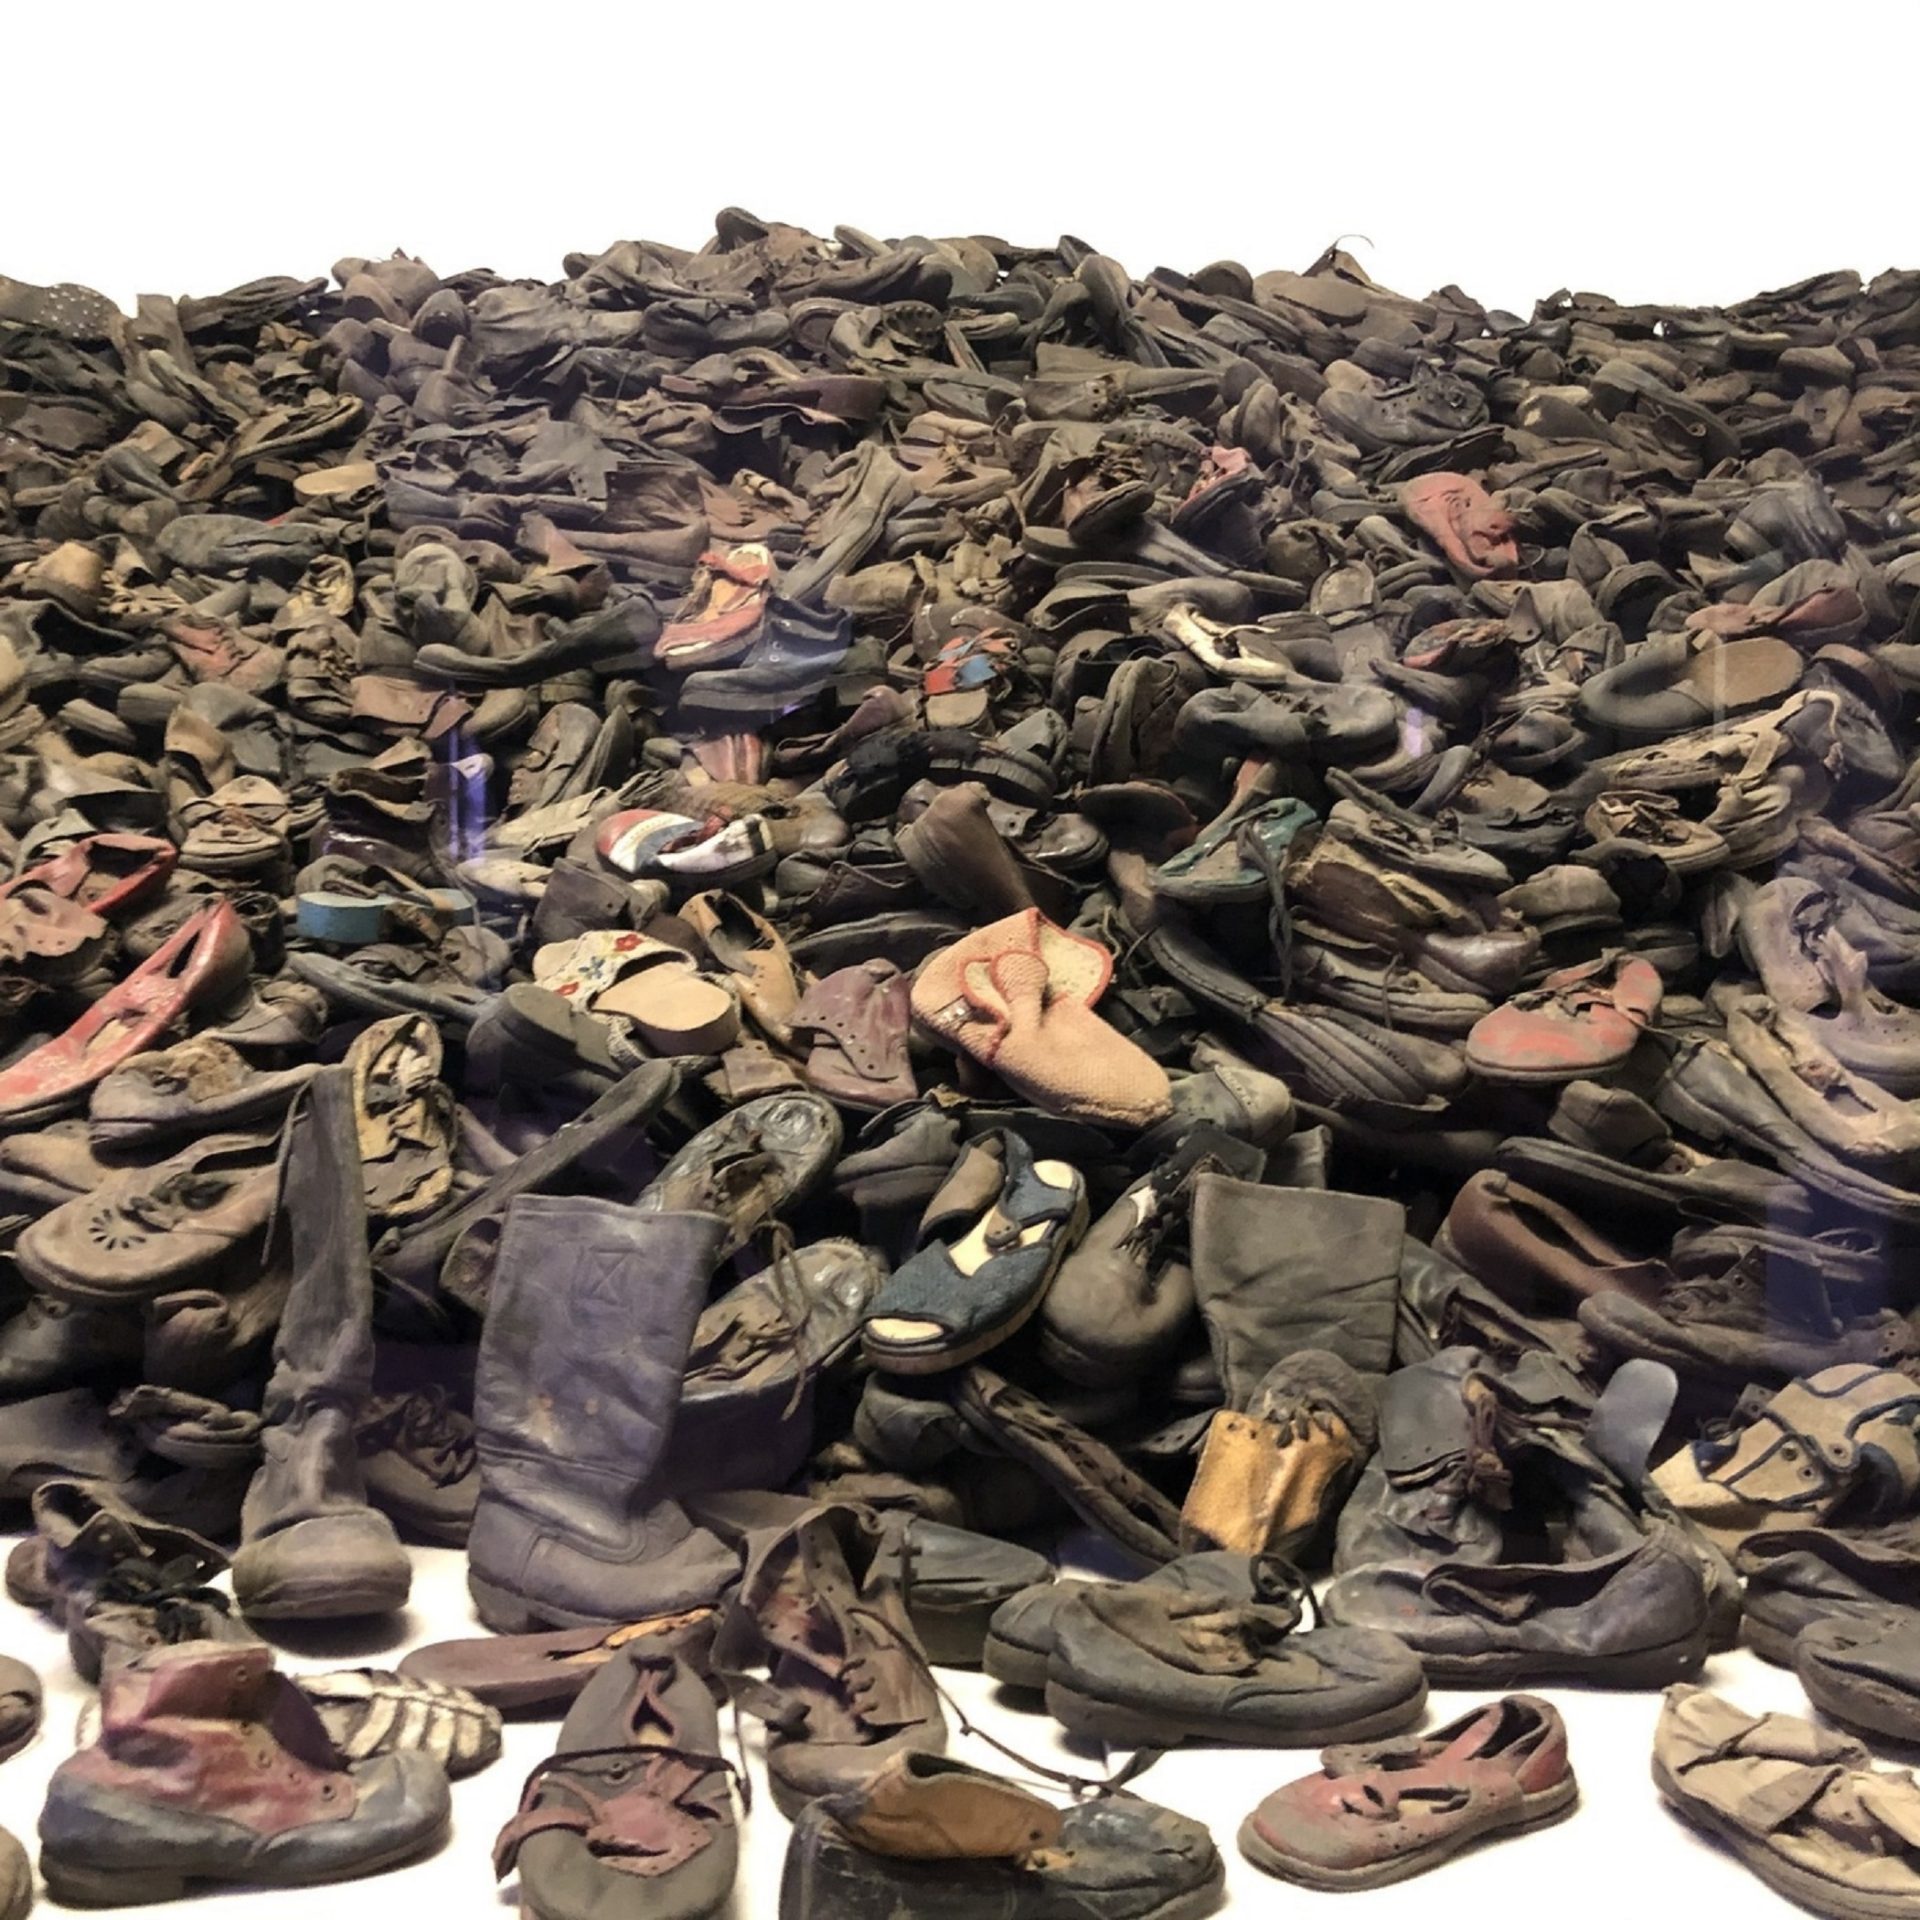 Thousands of shoes from those exterminated at Auschwitz make up one of the many exhibits at the museum on the site of the former death camp.